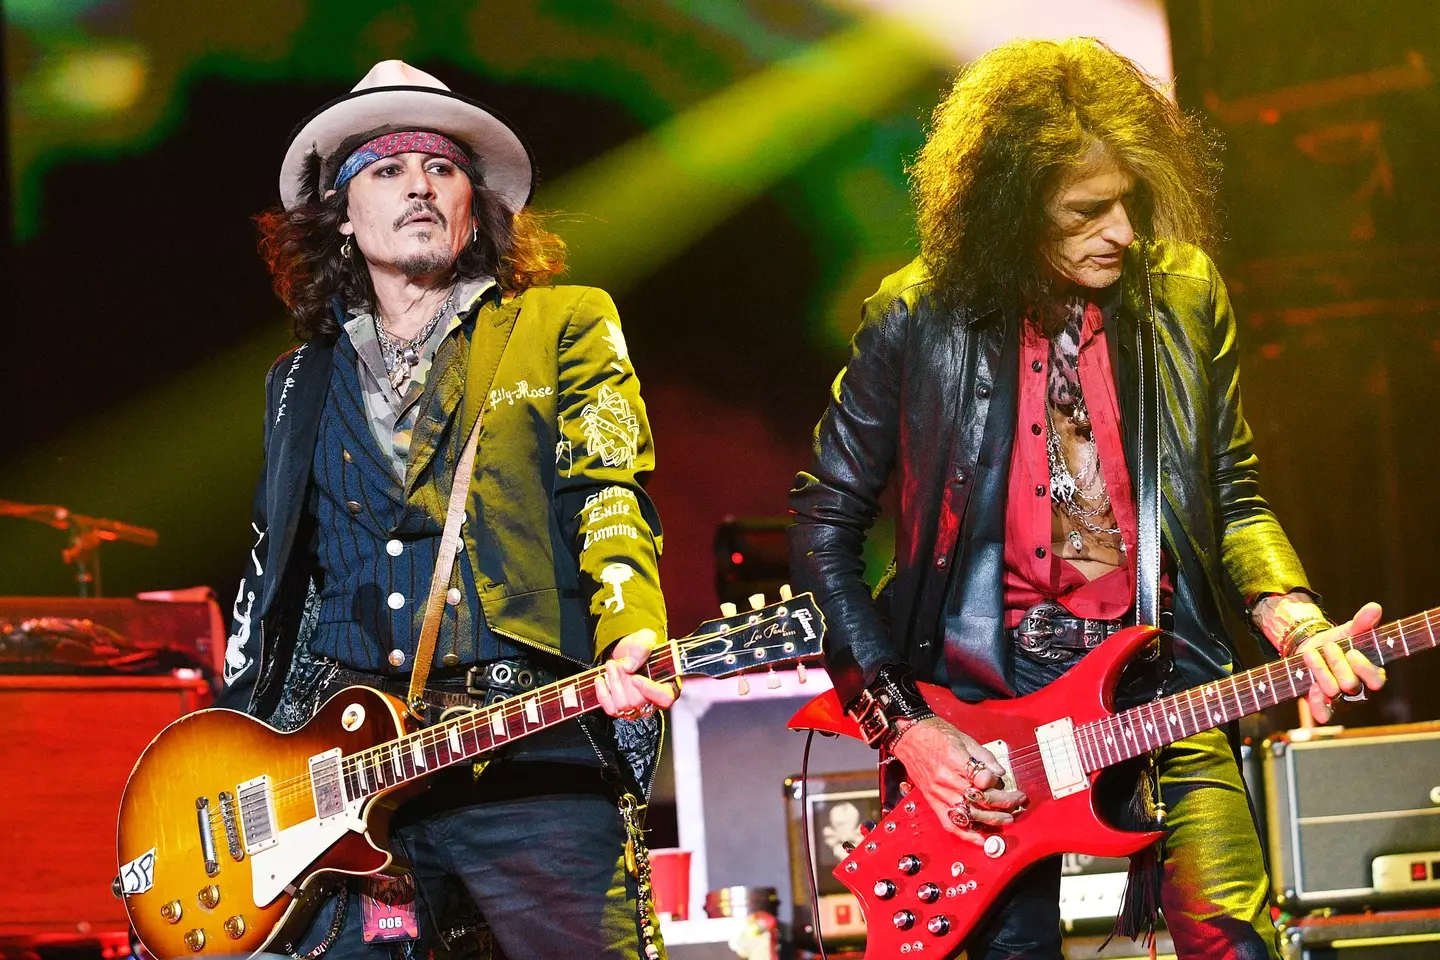 Depp is now in the Hollywood supergroup the Hollywood Vampires. (Jim Dyson/Getty Images)